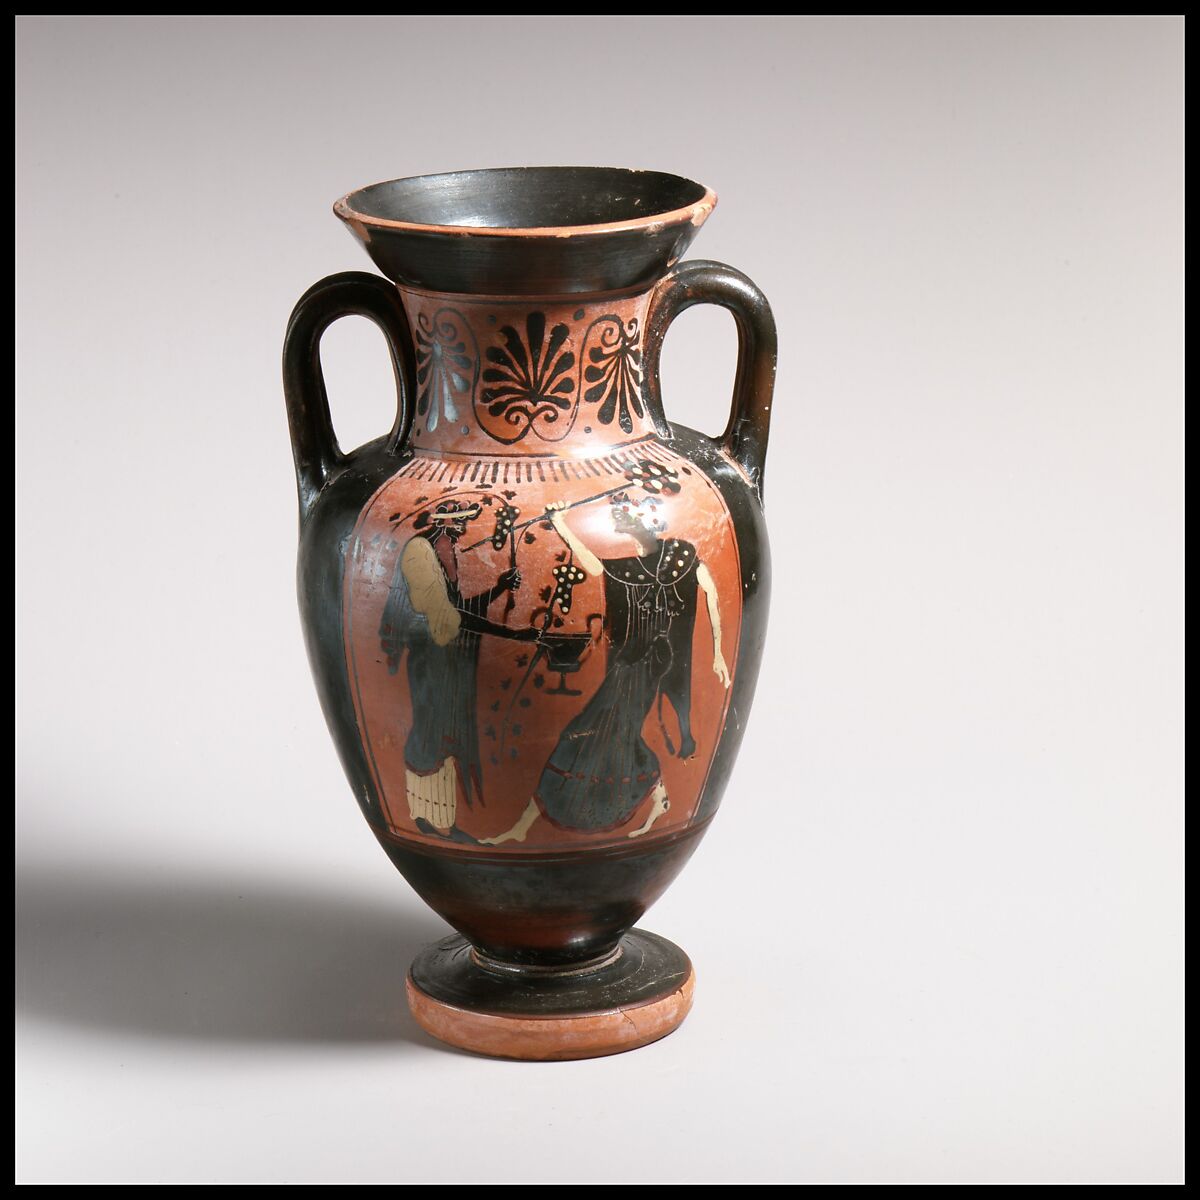 Neck-amphora, Attributed to the Diosphos Painter, Terracotta, Greek, Attic 